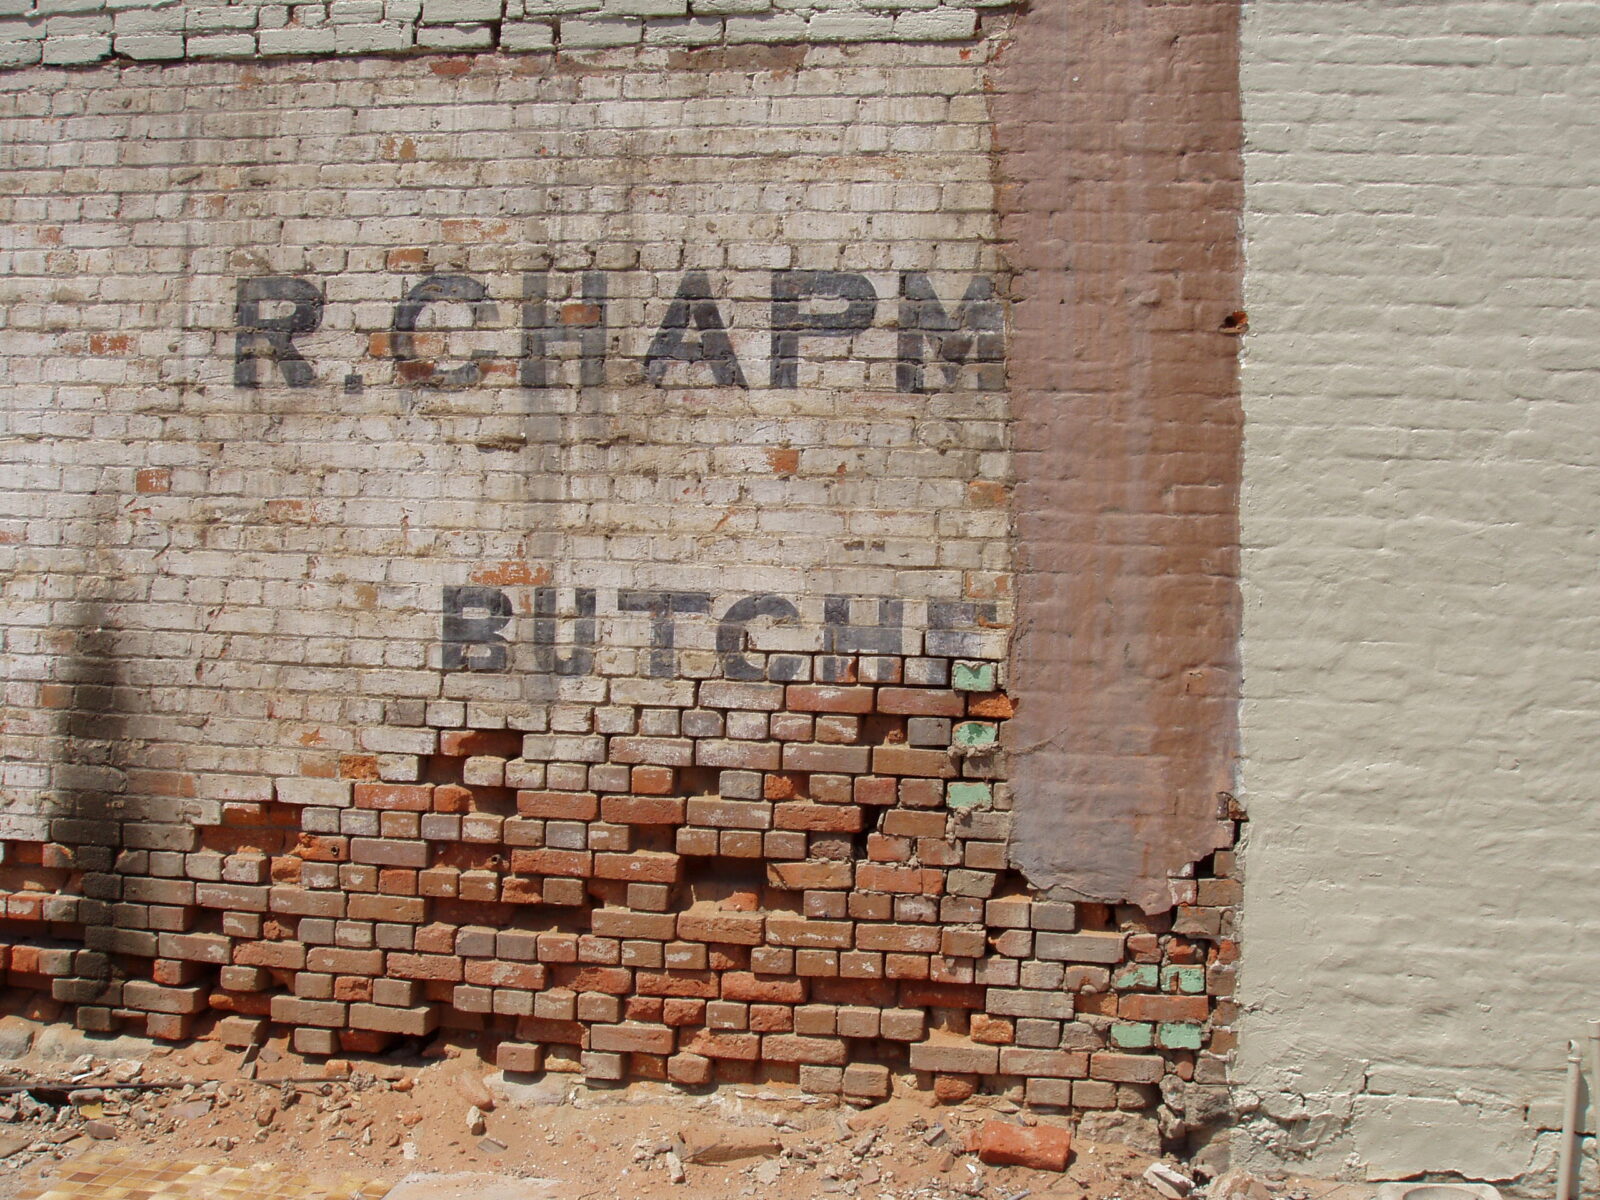 Side wall of the Bakery showing R. Chapman, Butcher of Morpeth